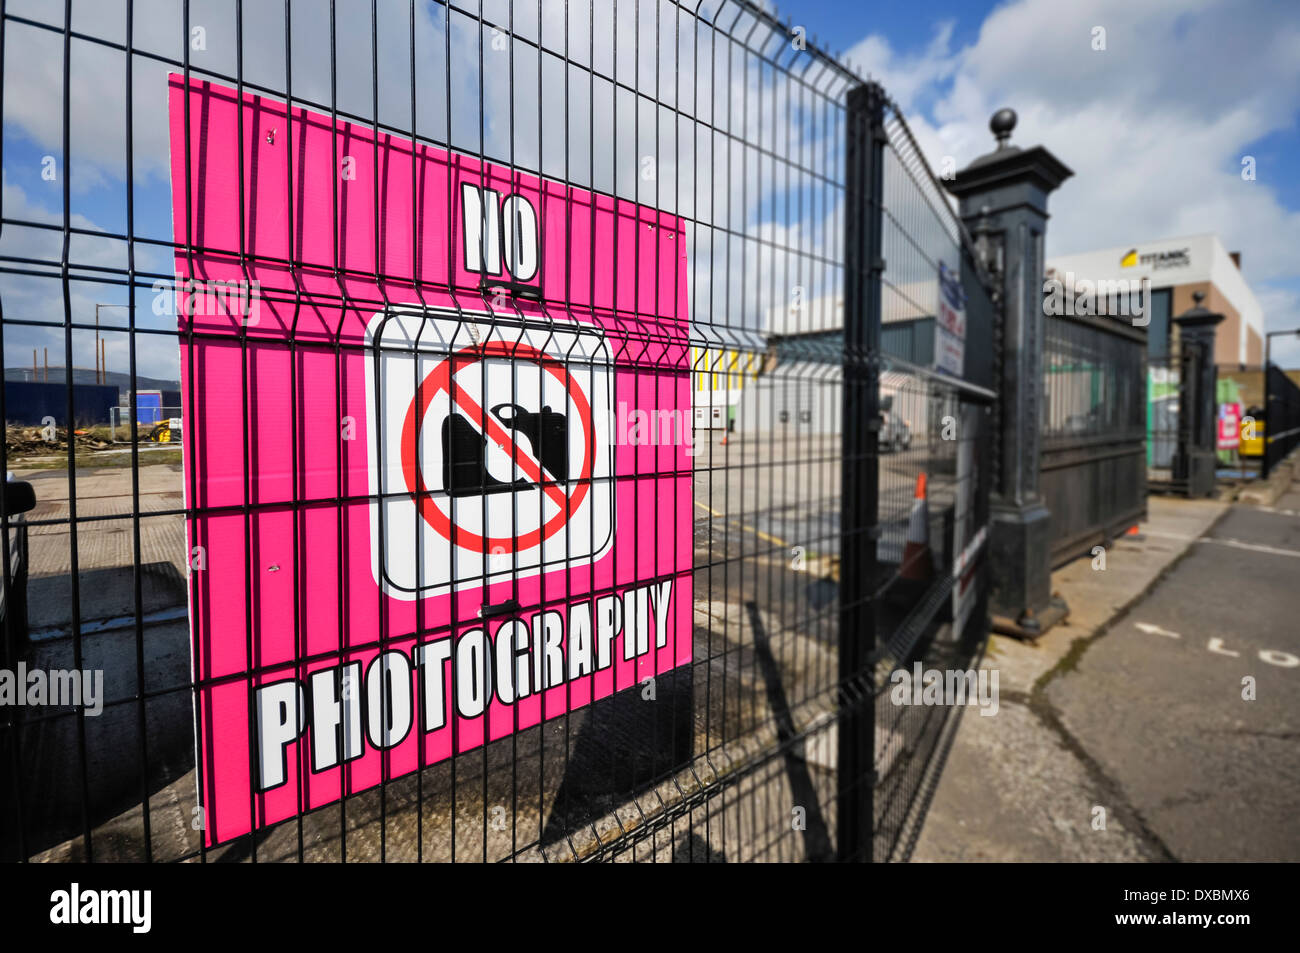 No photography sign on a fence Stock Photo